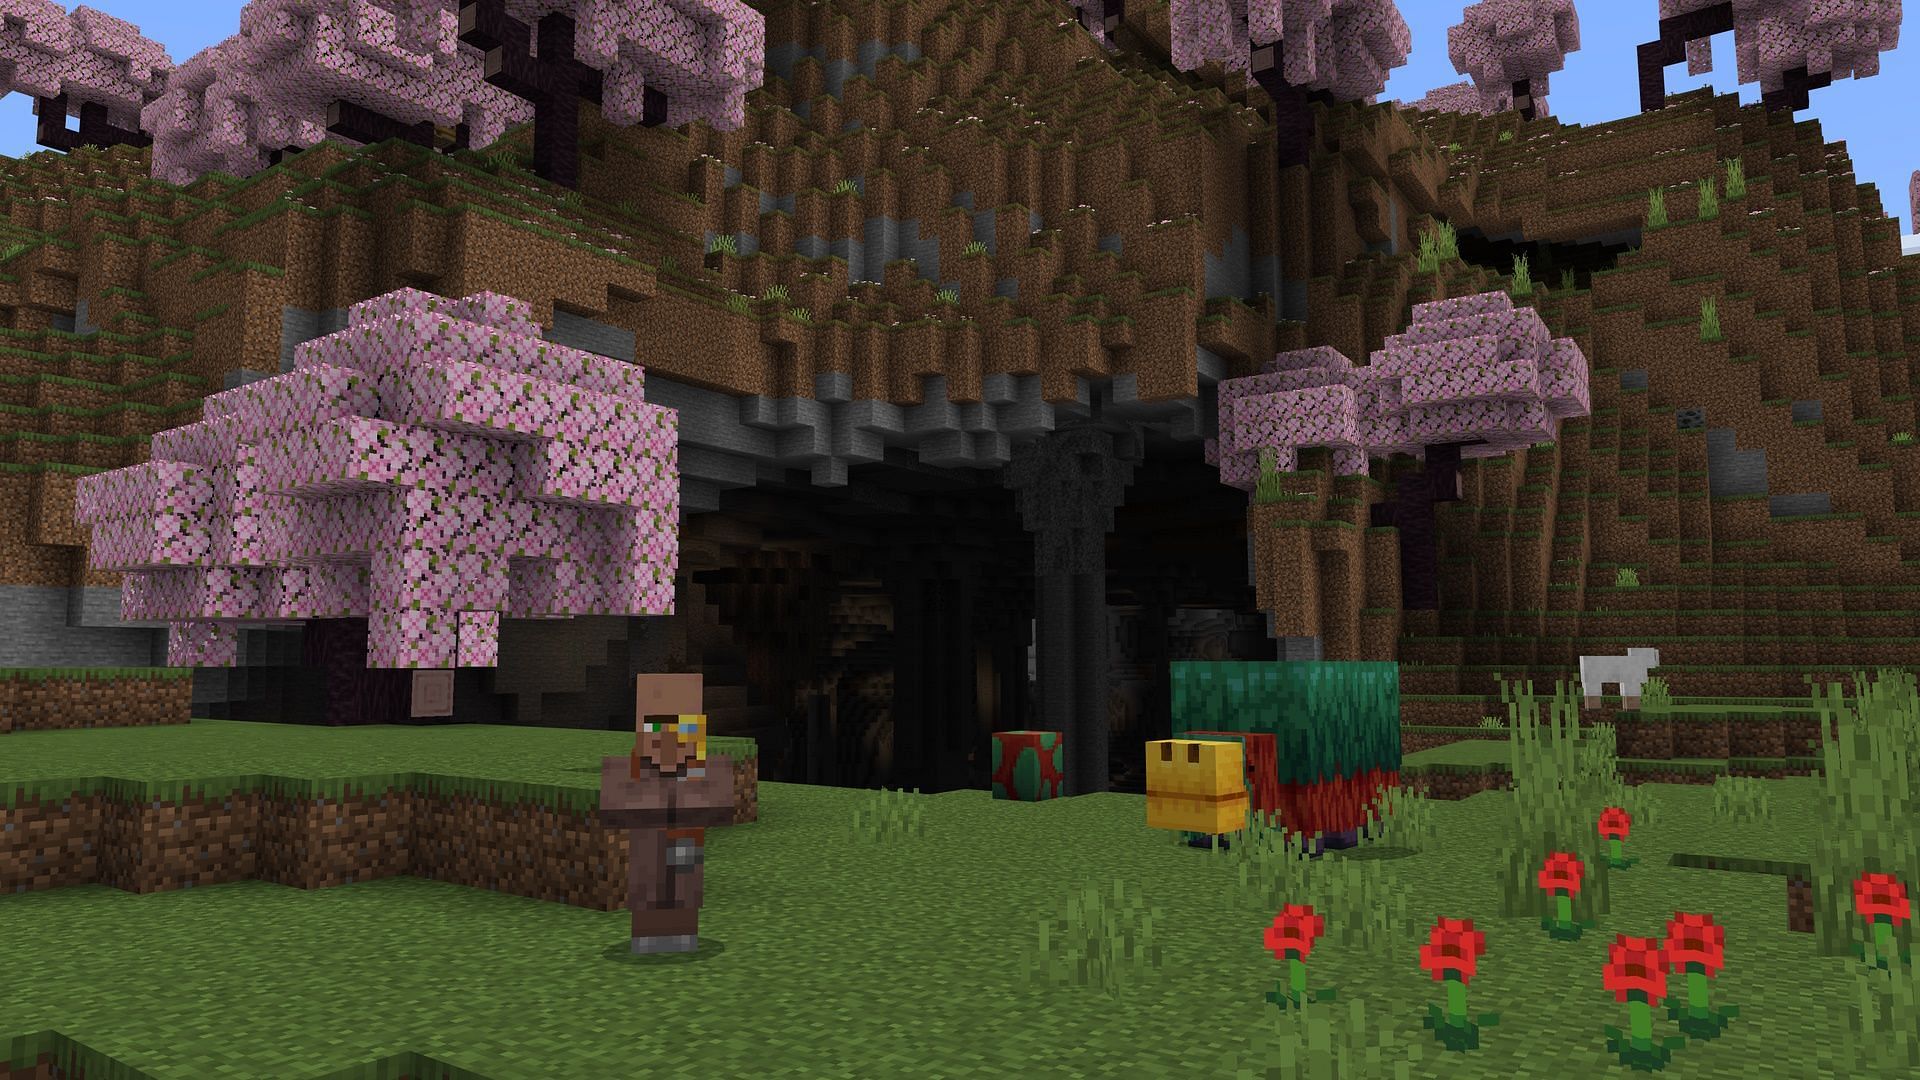 Minecraft's Free Trials and Tales Update Has a PS4 Release Date